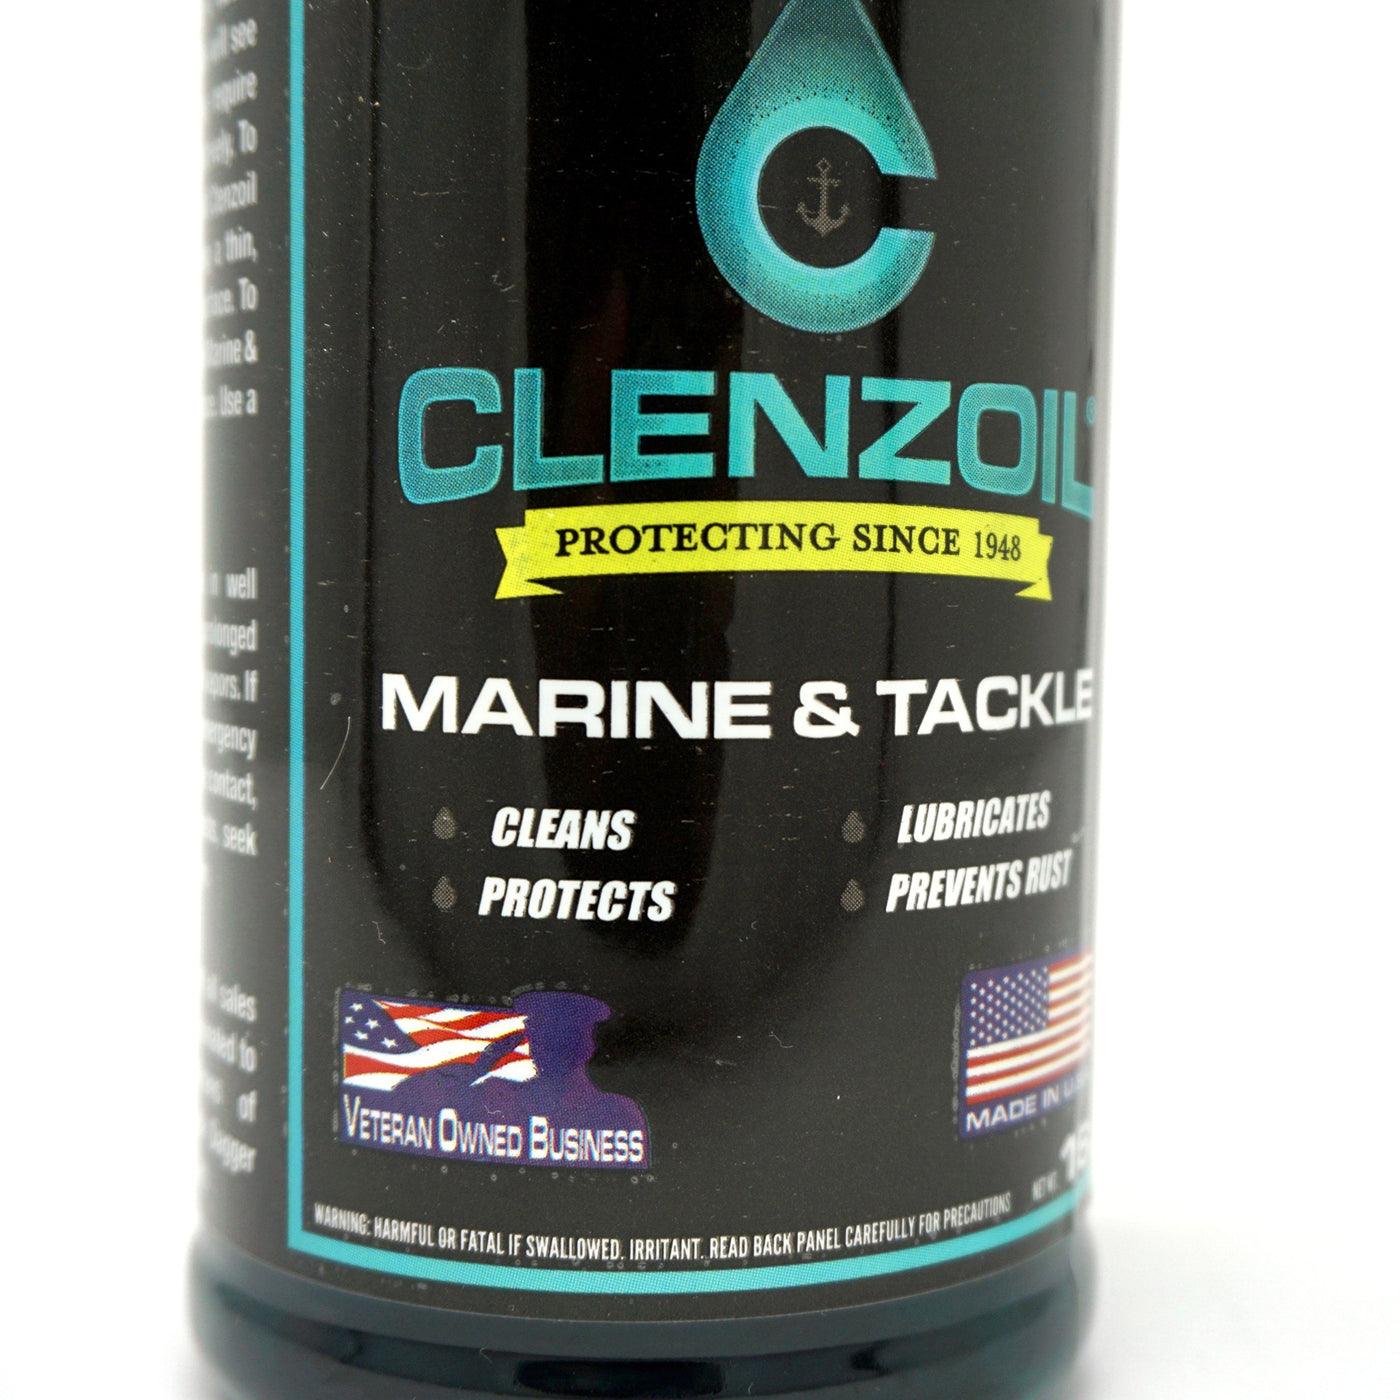 Clenzoil Marine & Tackle Rust Prevention Spray Lubricant